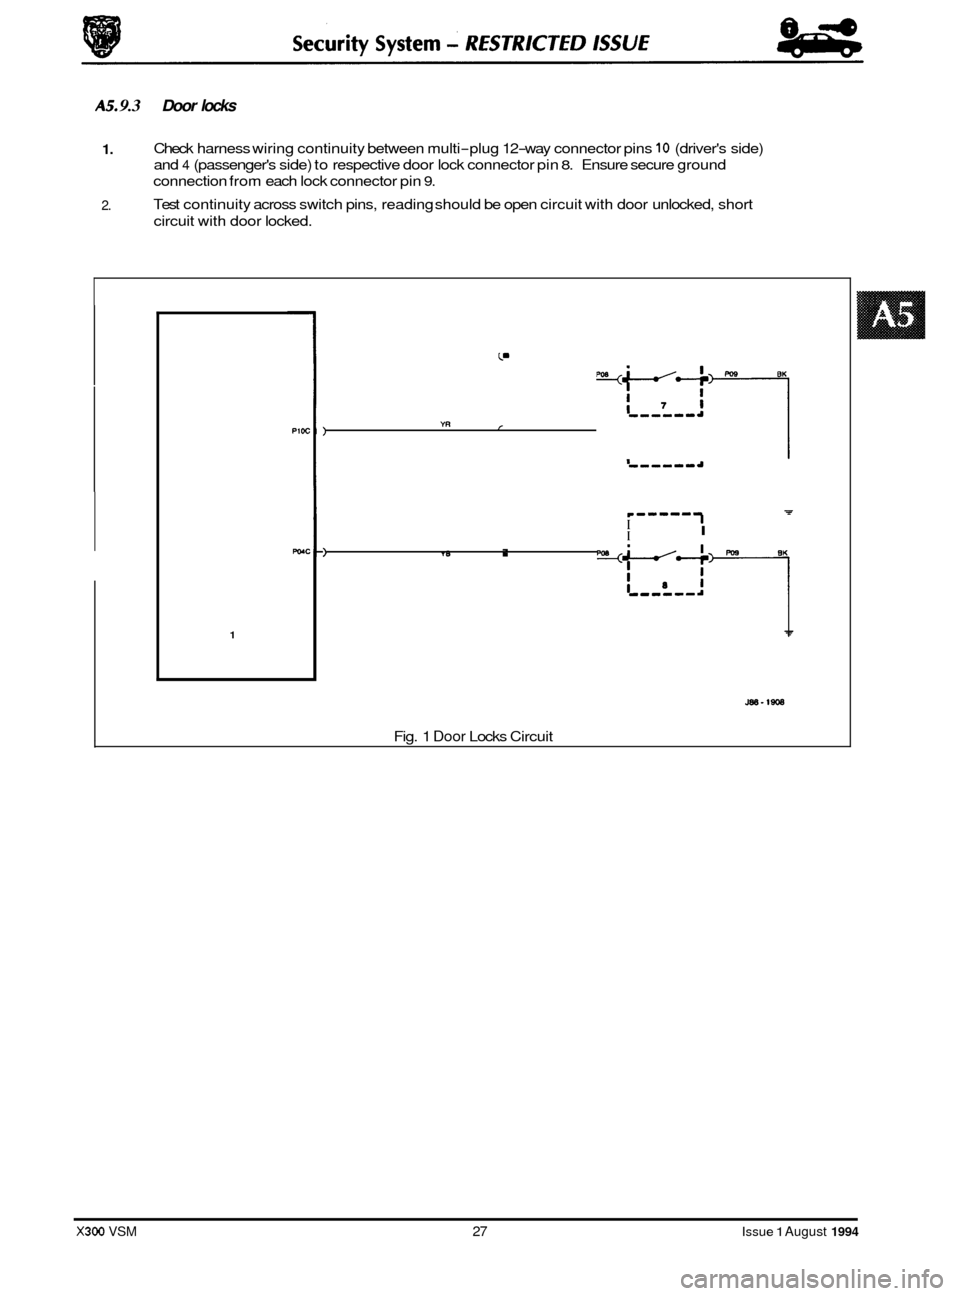 JAGUAR XJ6 1994 2.G Workshop Manual 0 
1 
AS. 9.3 Door locks 
U 1. Check harness  wiring continuity  between multi-plug 12-way connector  pins 10 (drivers side) 
and 
4 (passengers  side) to respective  door lock connector  pin 8. Ens